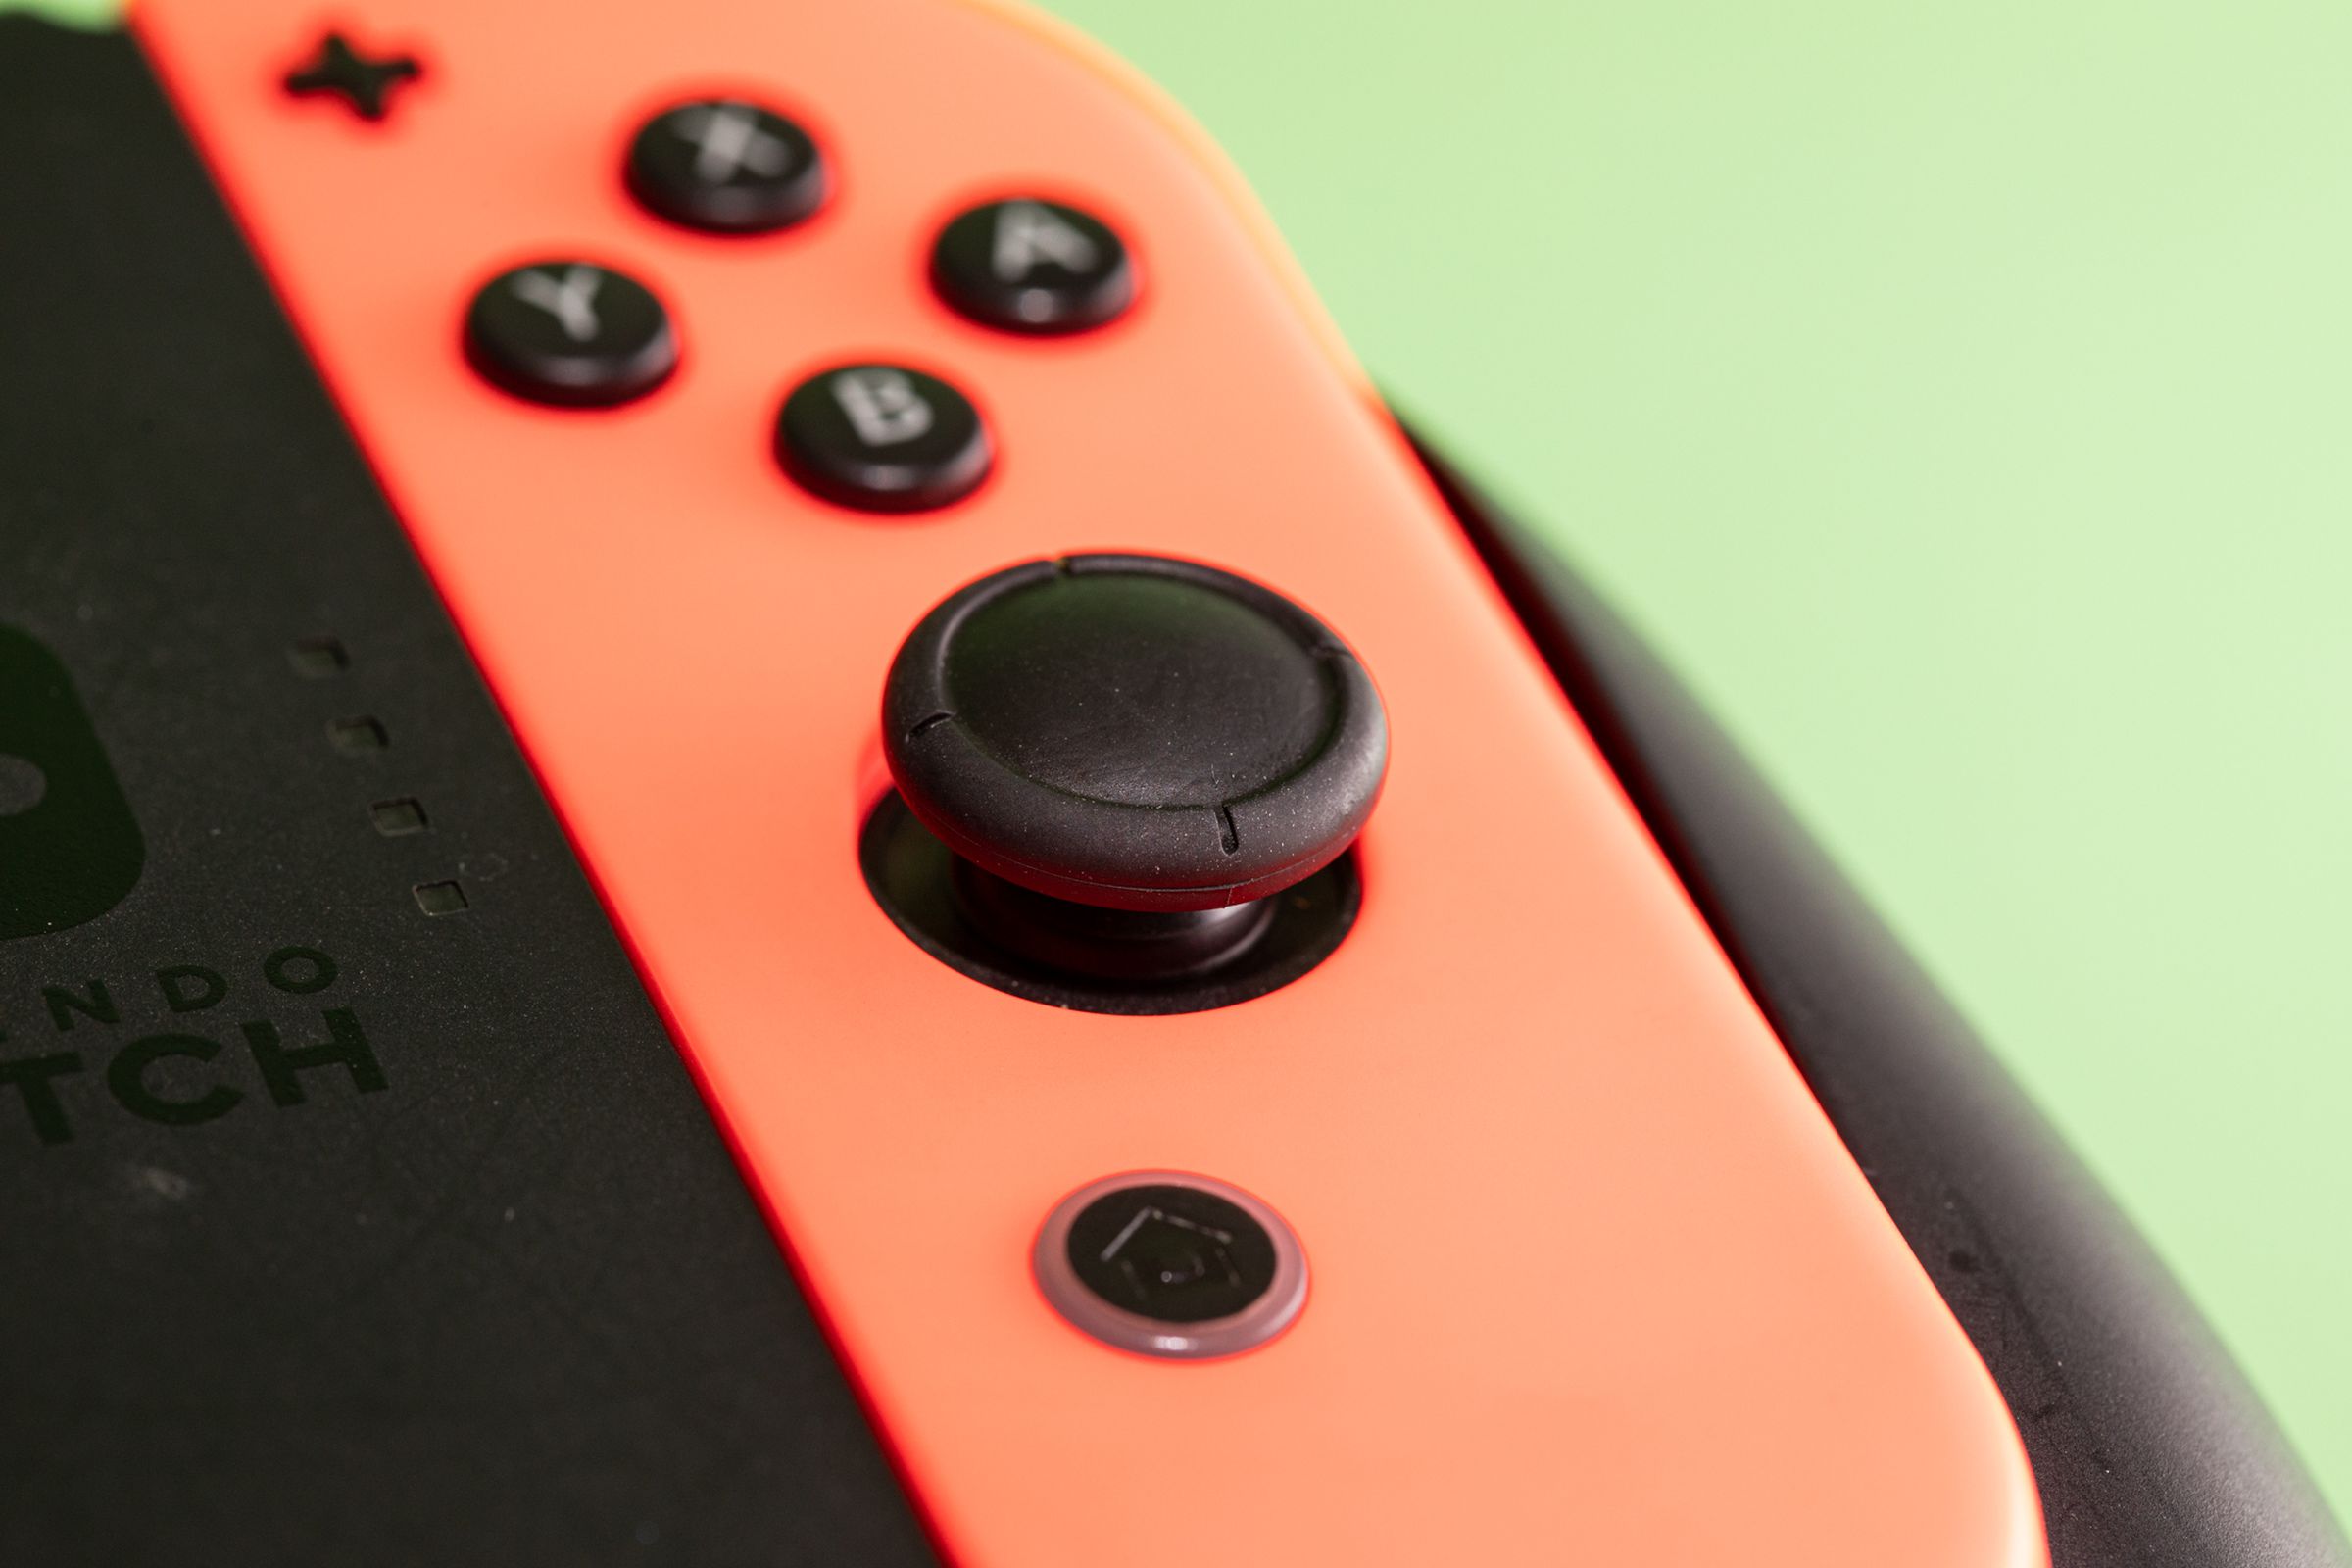 A black low-profile Nintendo Switch joystick embedded in a red controller.